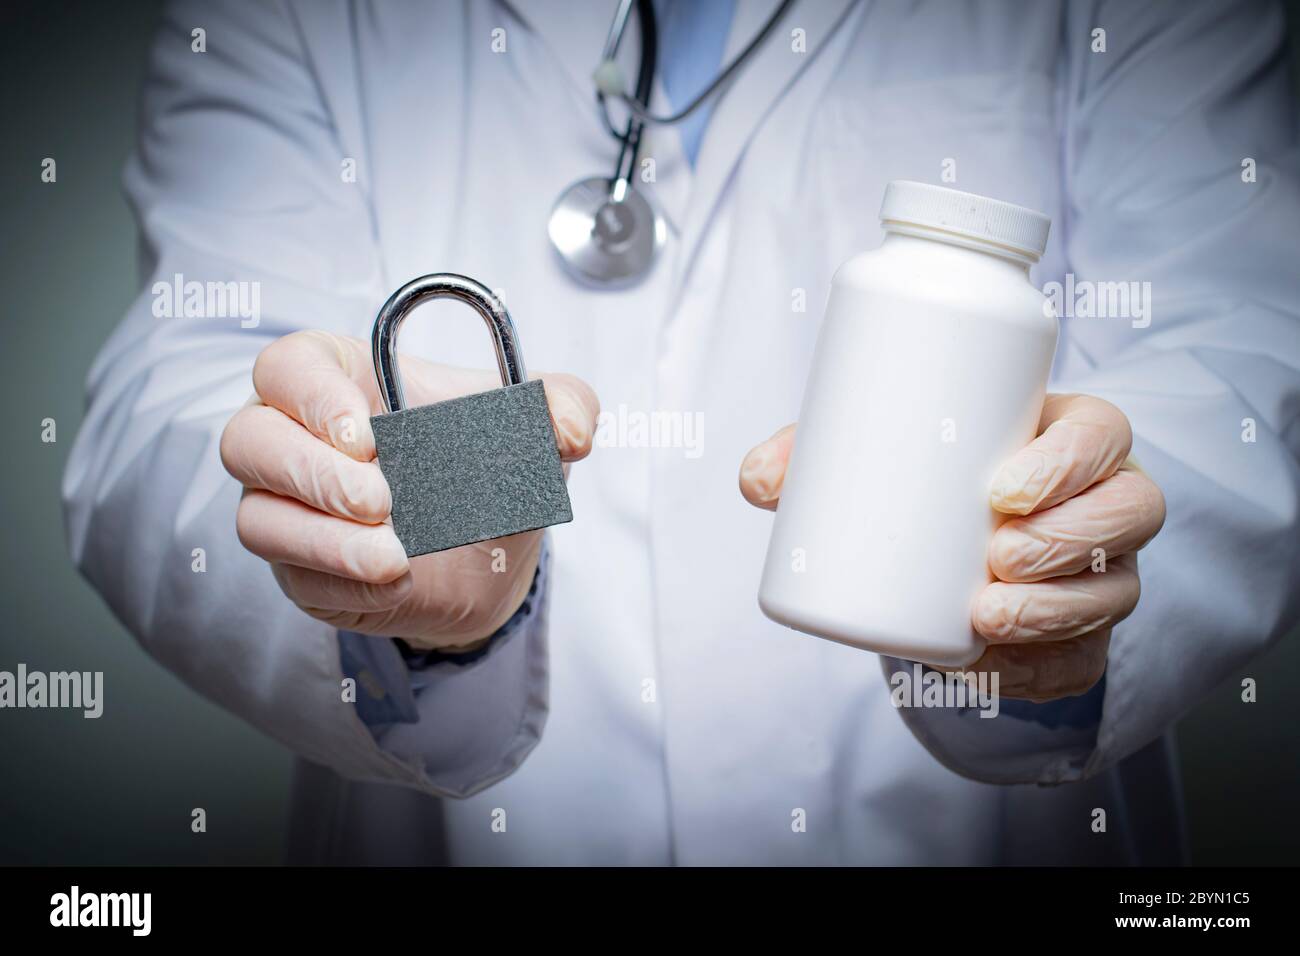 A doctor giving medication treatment options during a virus pandemic Stock Photo